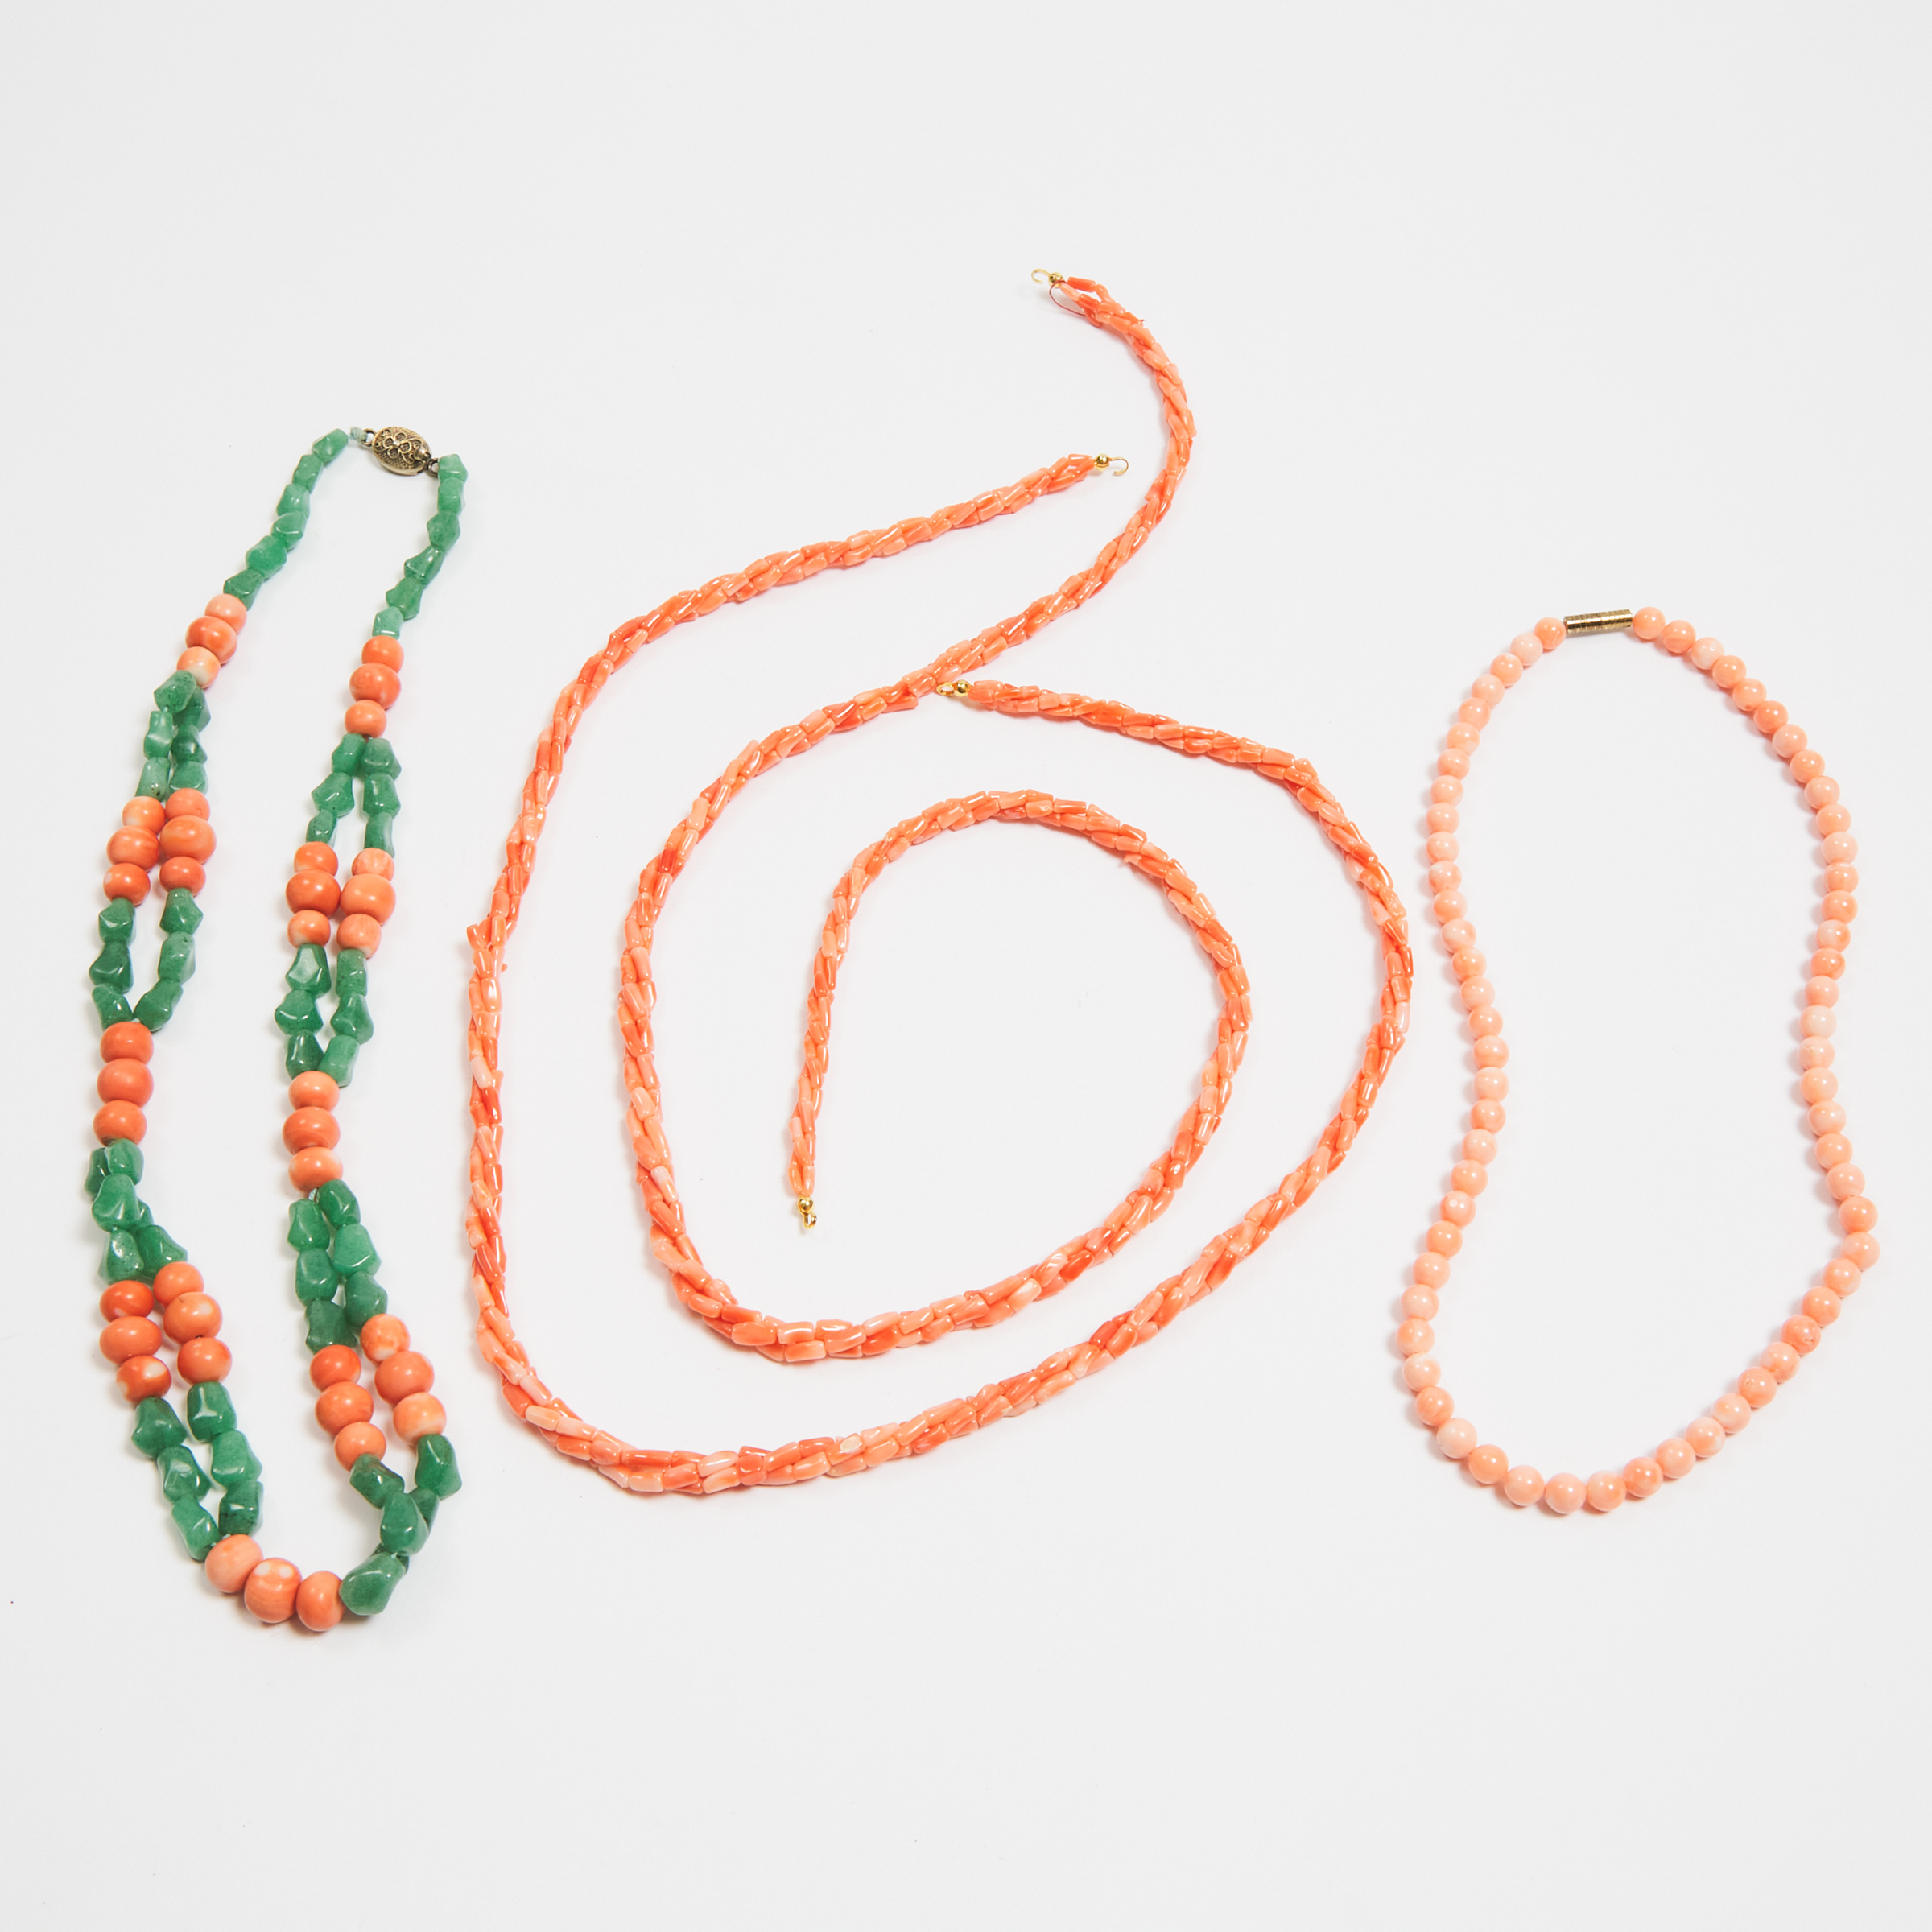 Four Strands of Coral Necklaces. Early to Mid 20th Century